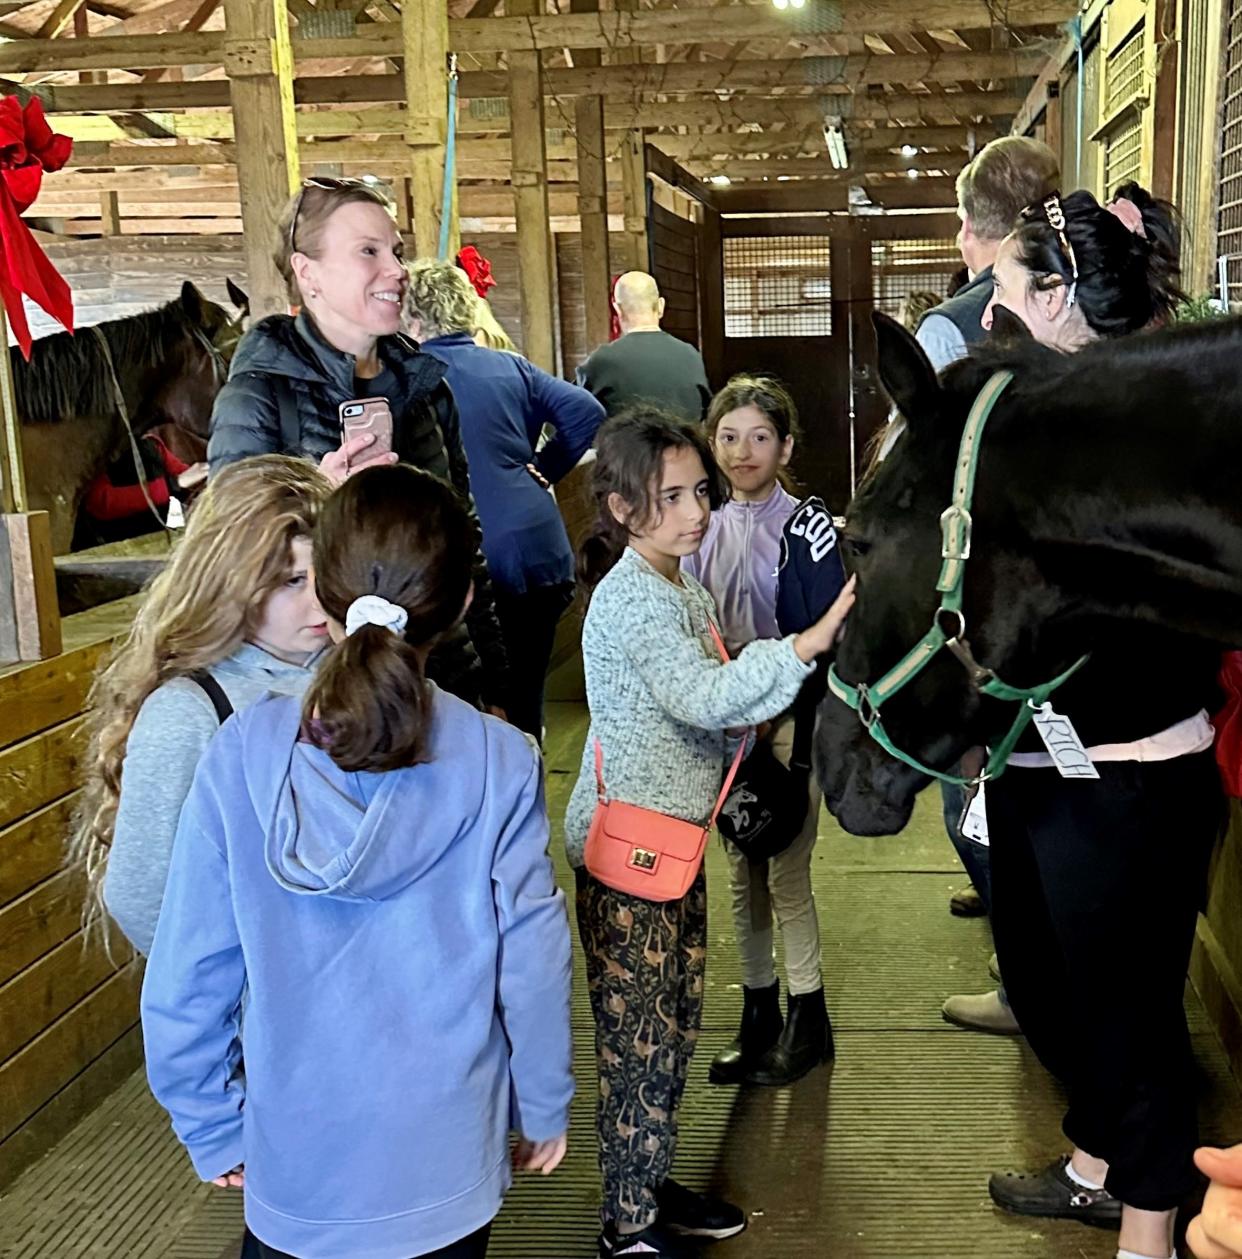 Children pet a horse at the Standardbred Retirement Foundation's 'Holiday at the Farm' open house Nov. 11.